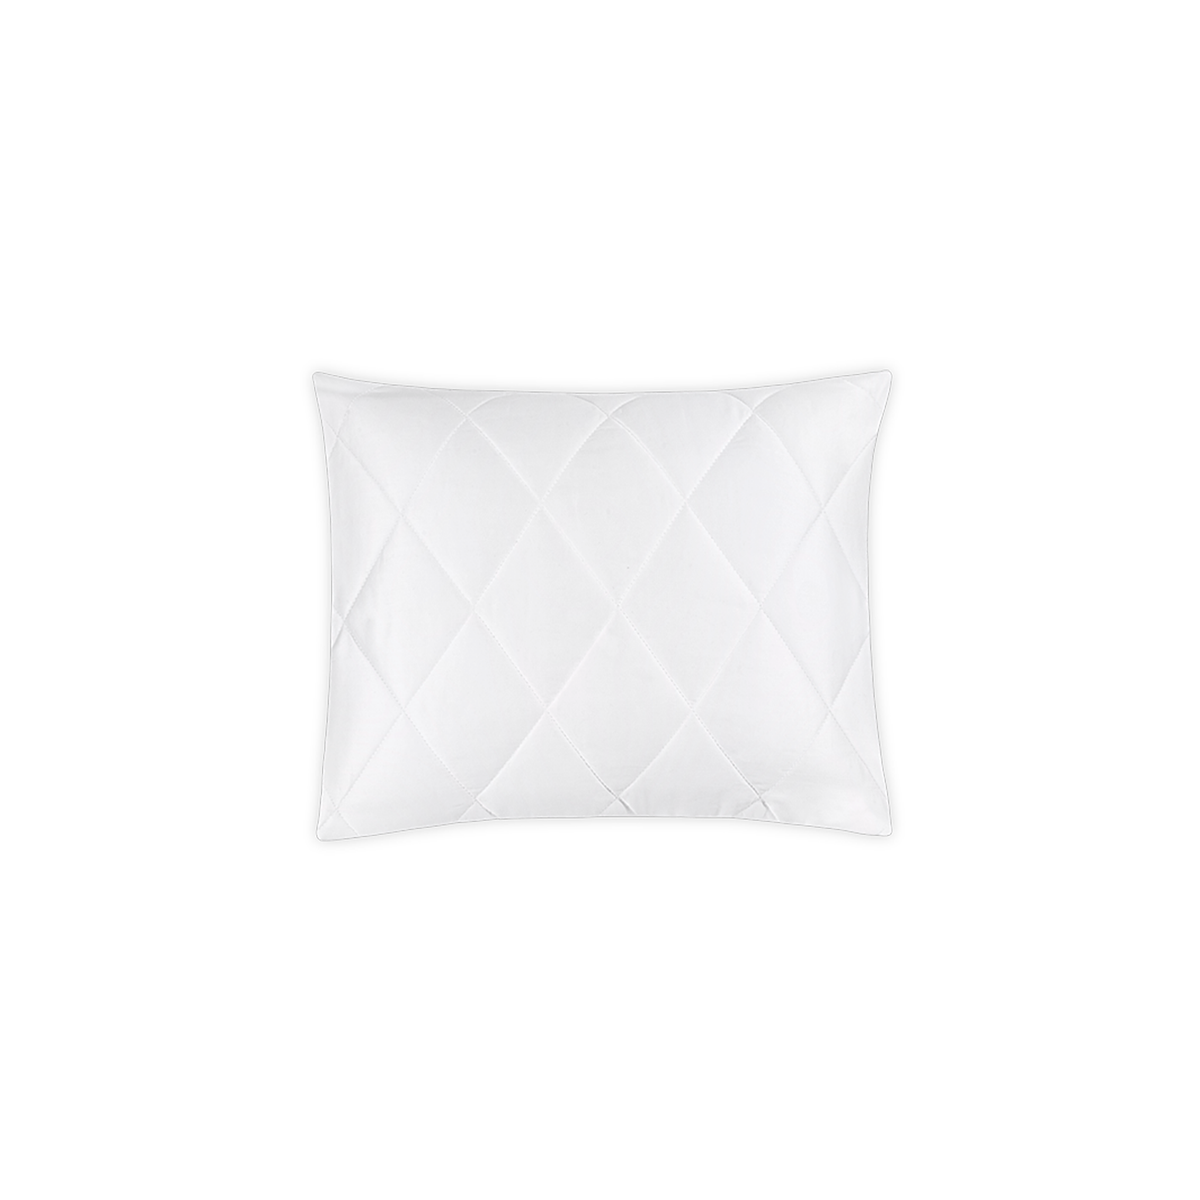 Silo Image of Matouk Nocturne Quilted Bedding Boudoir Sham in White